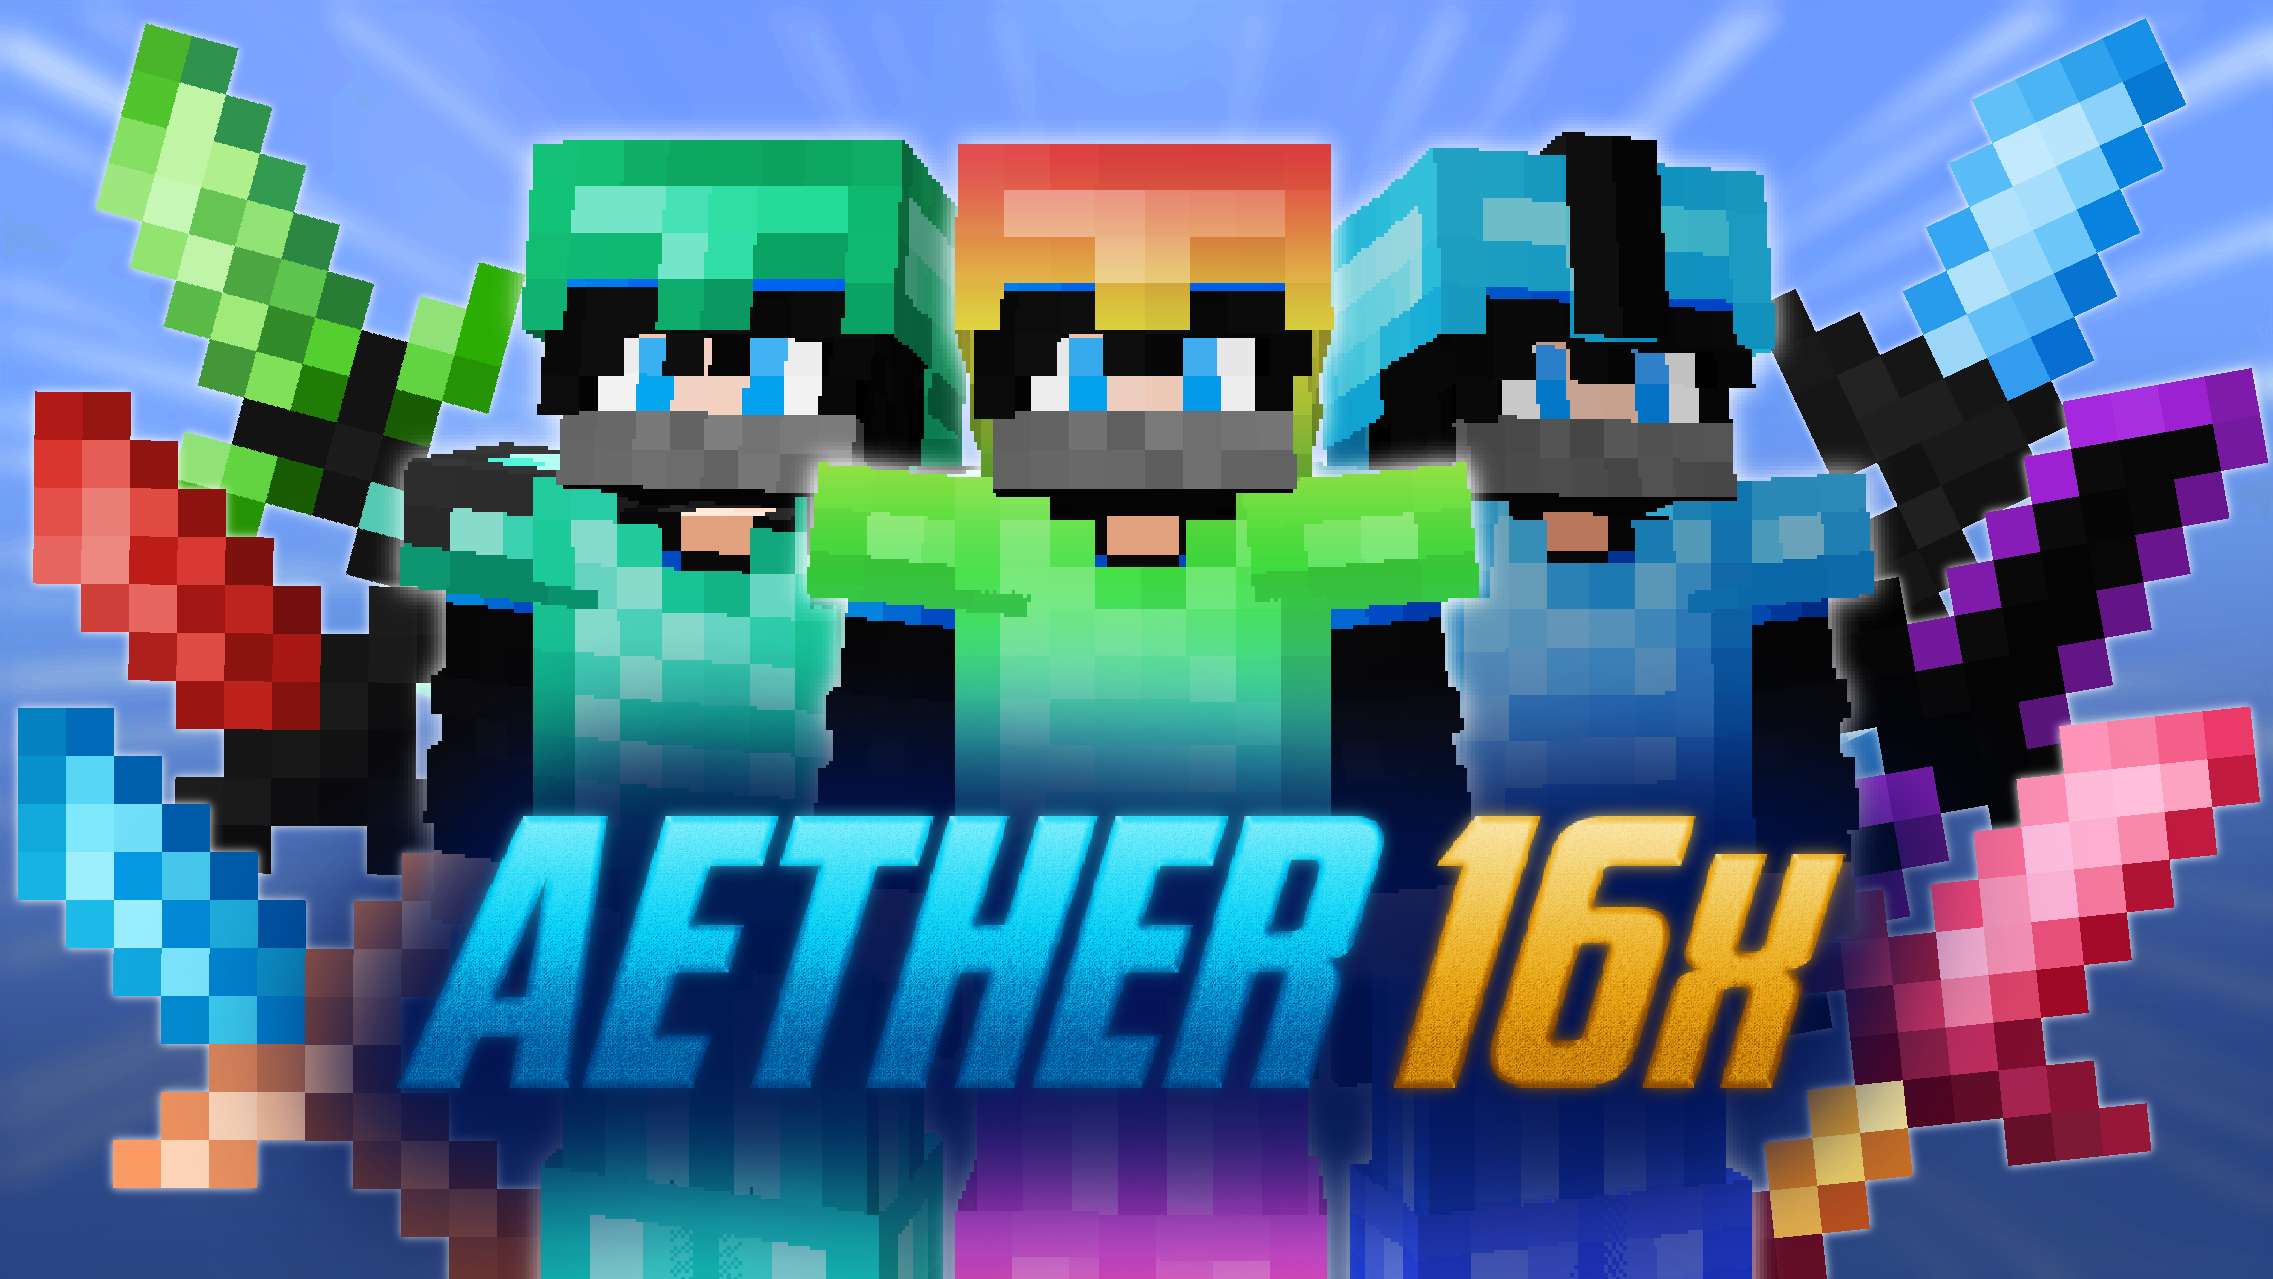 Aether 16x [JustDash] 16 by Mqryo on PvPRP